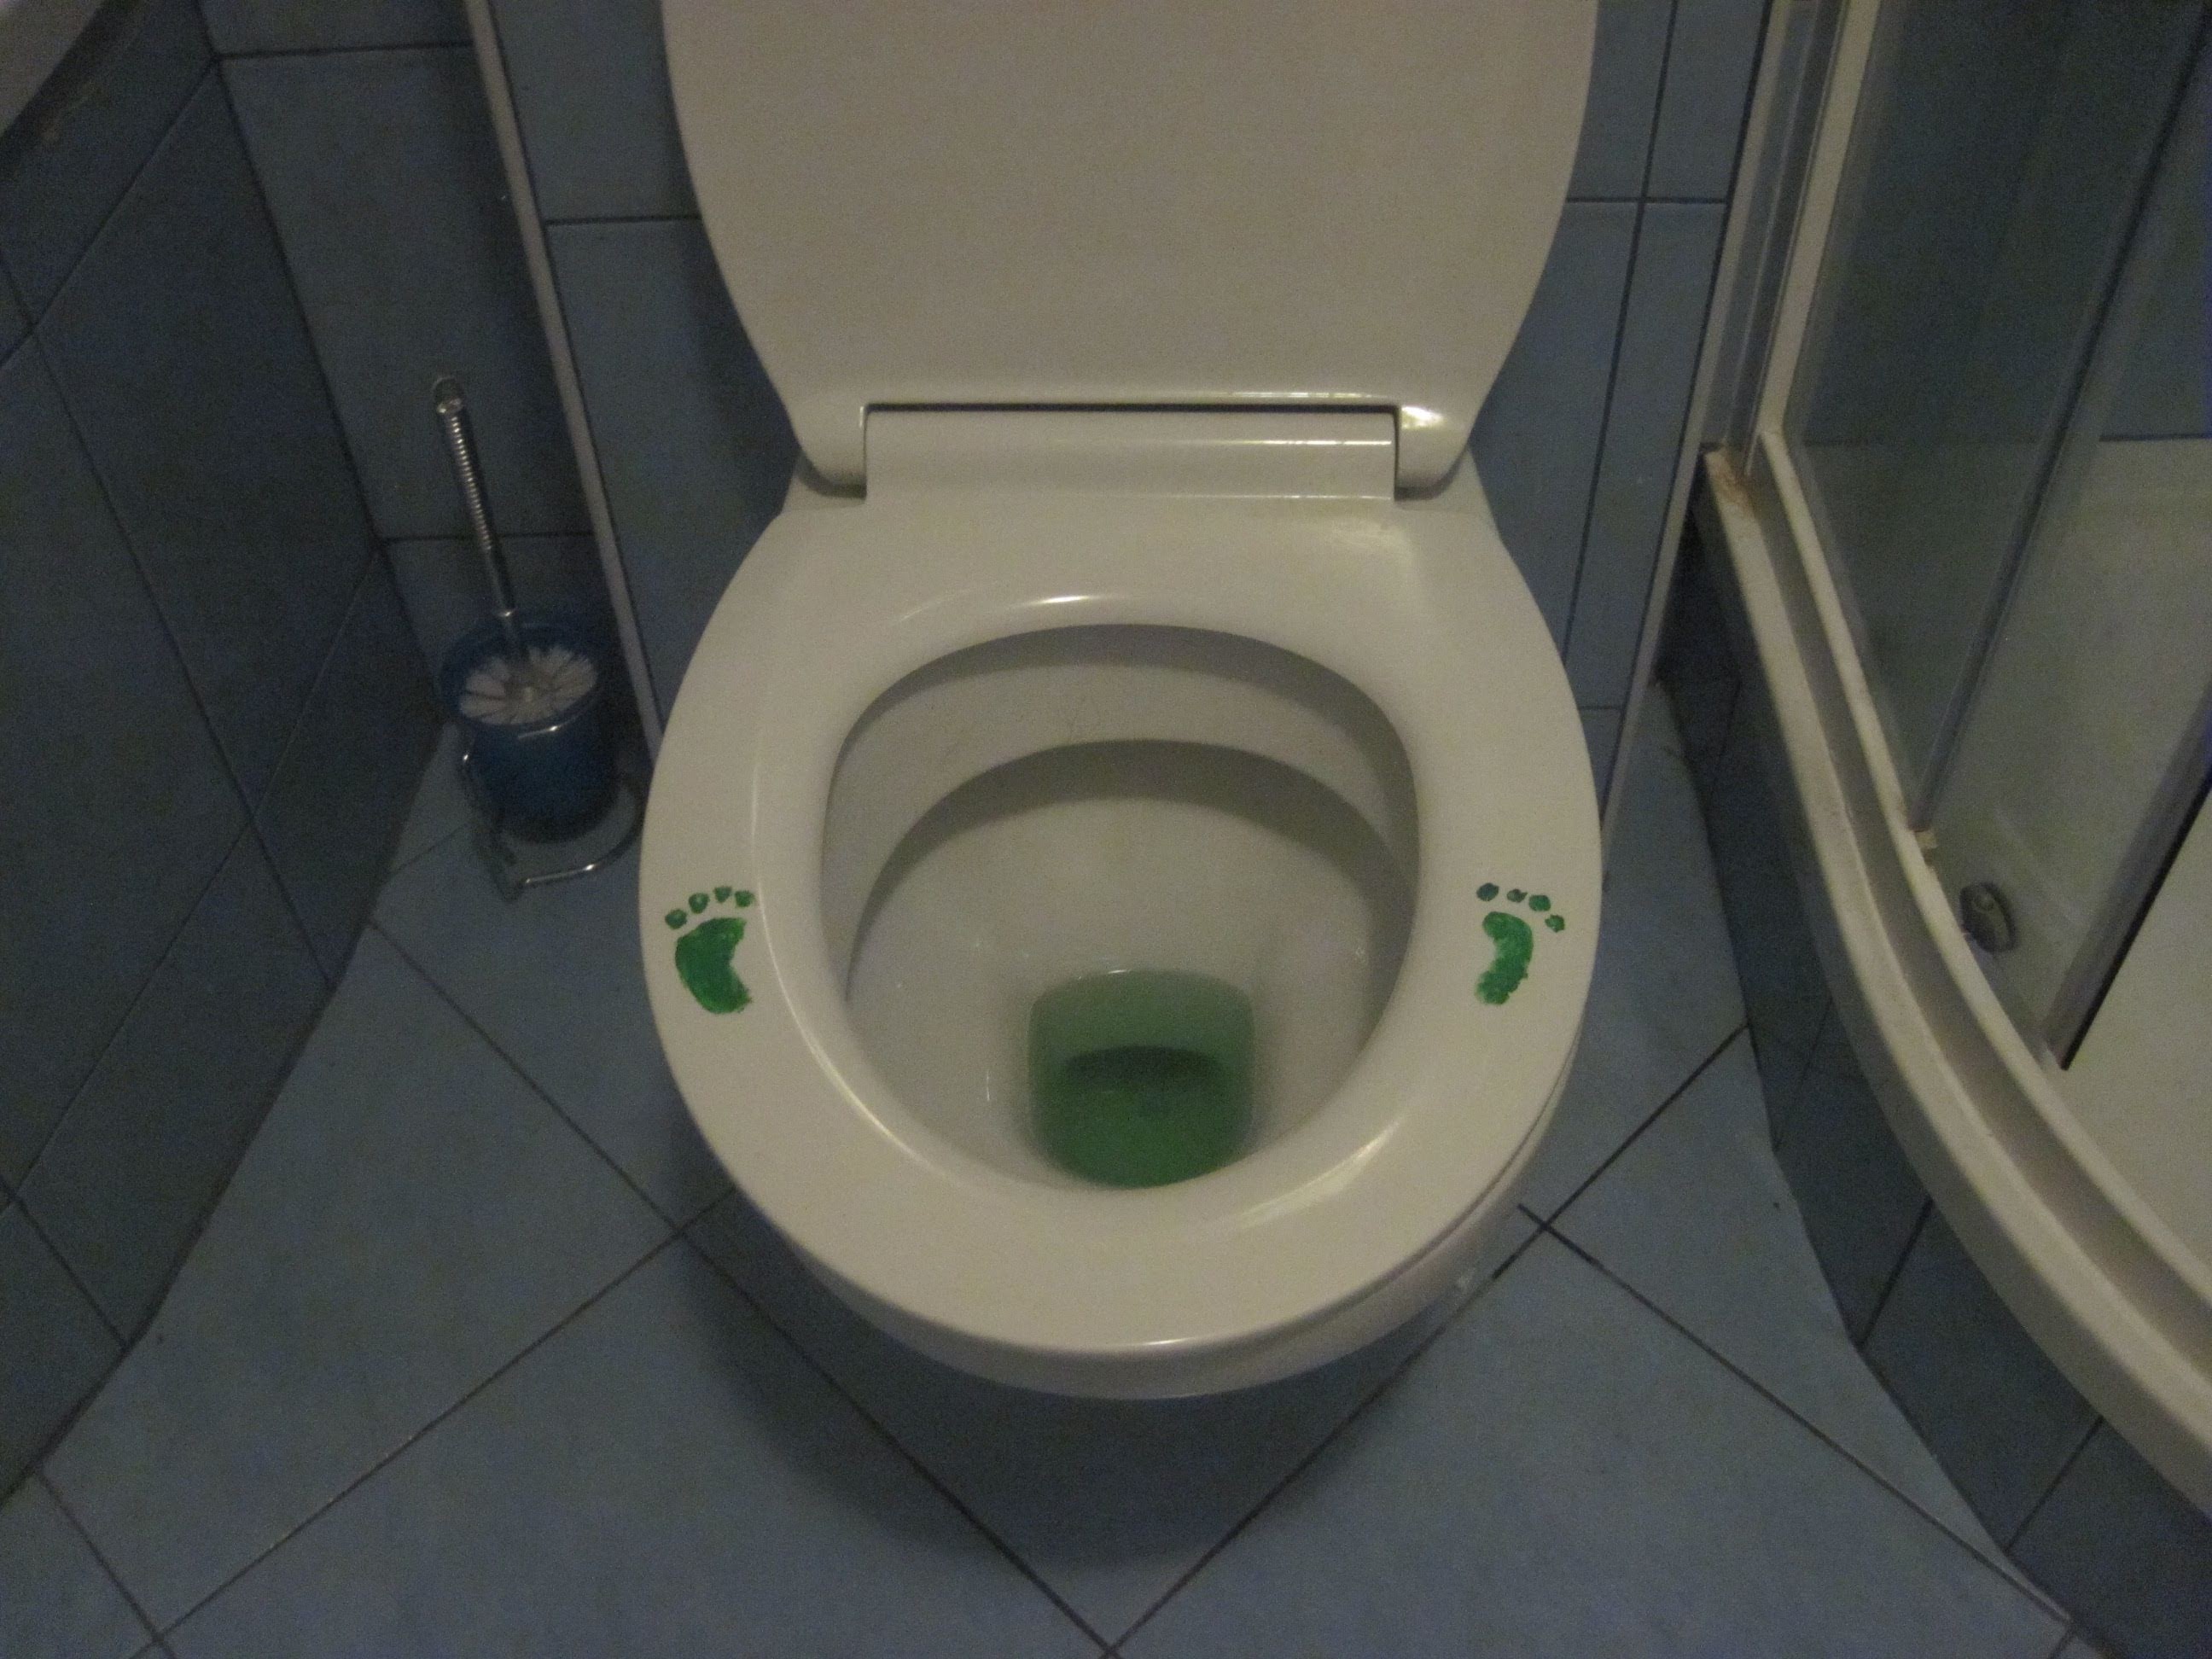 I guess Leprechaun peed in our toilet...